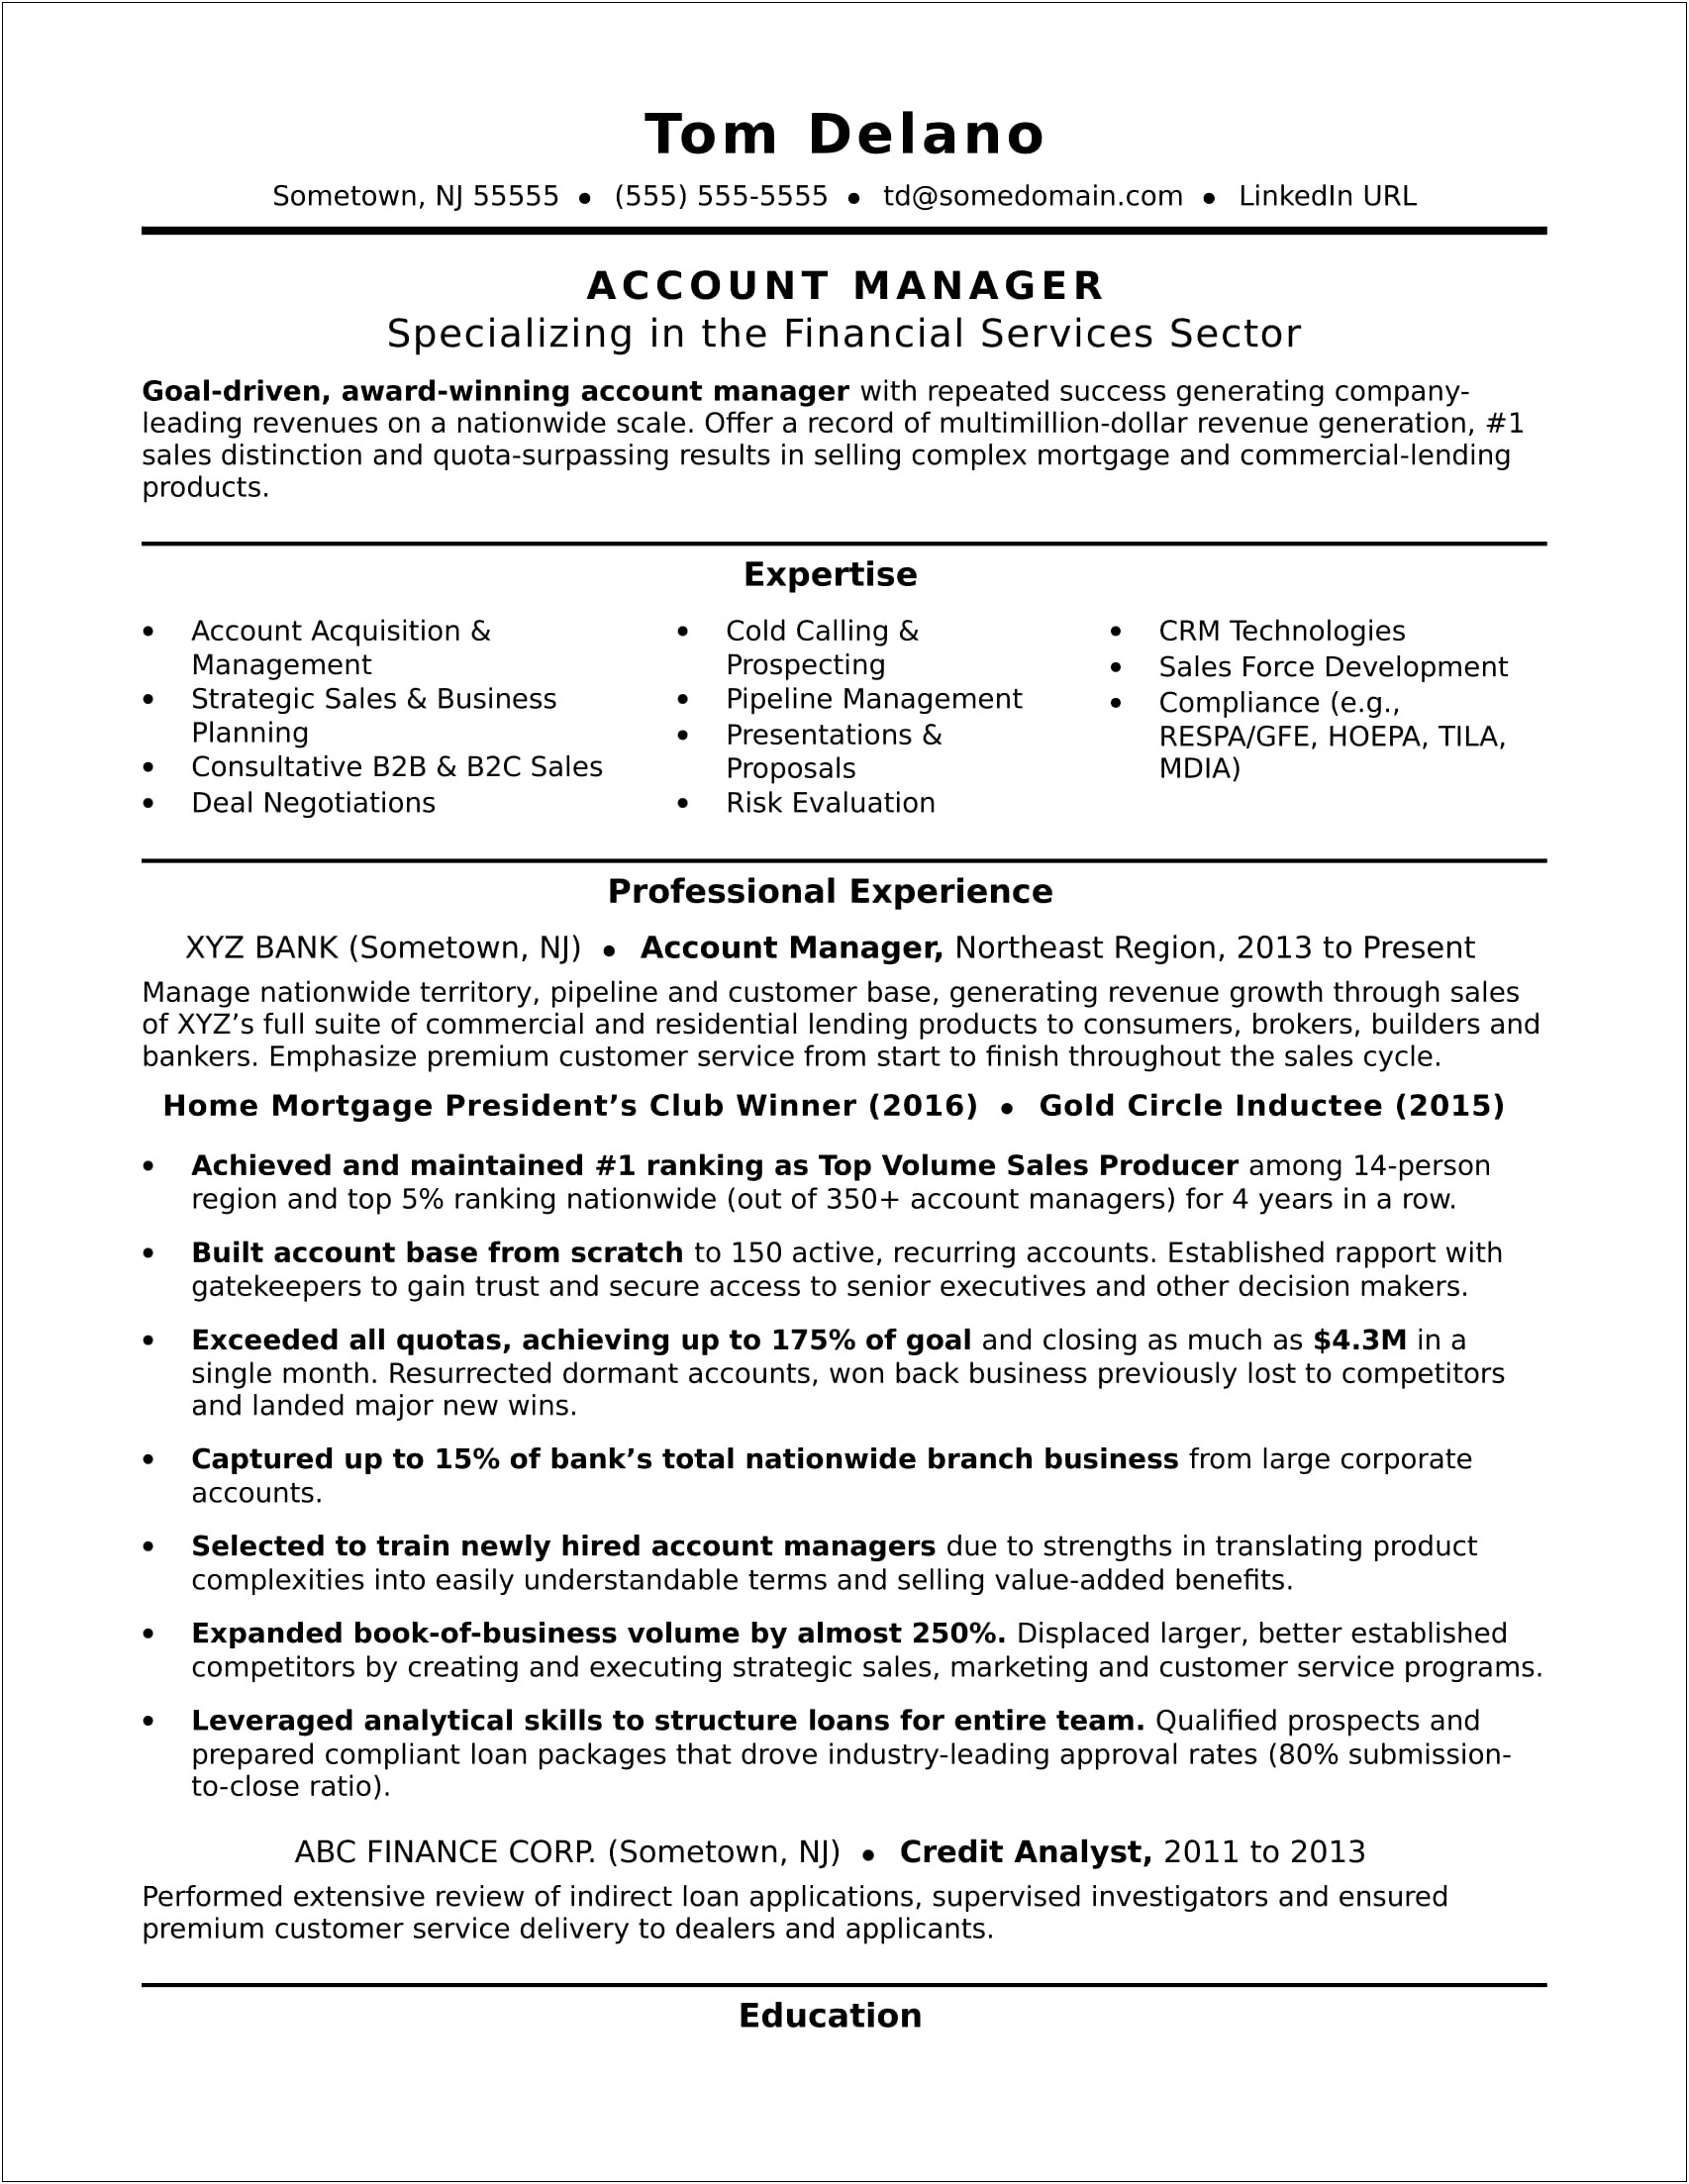 Resume Summary For Account Managment